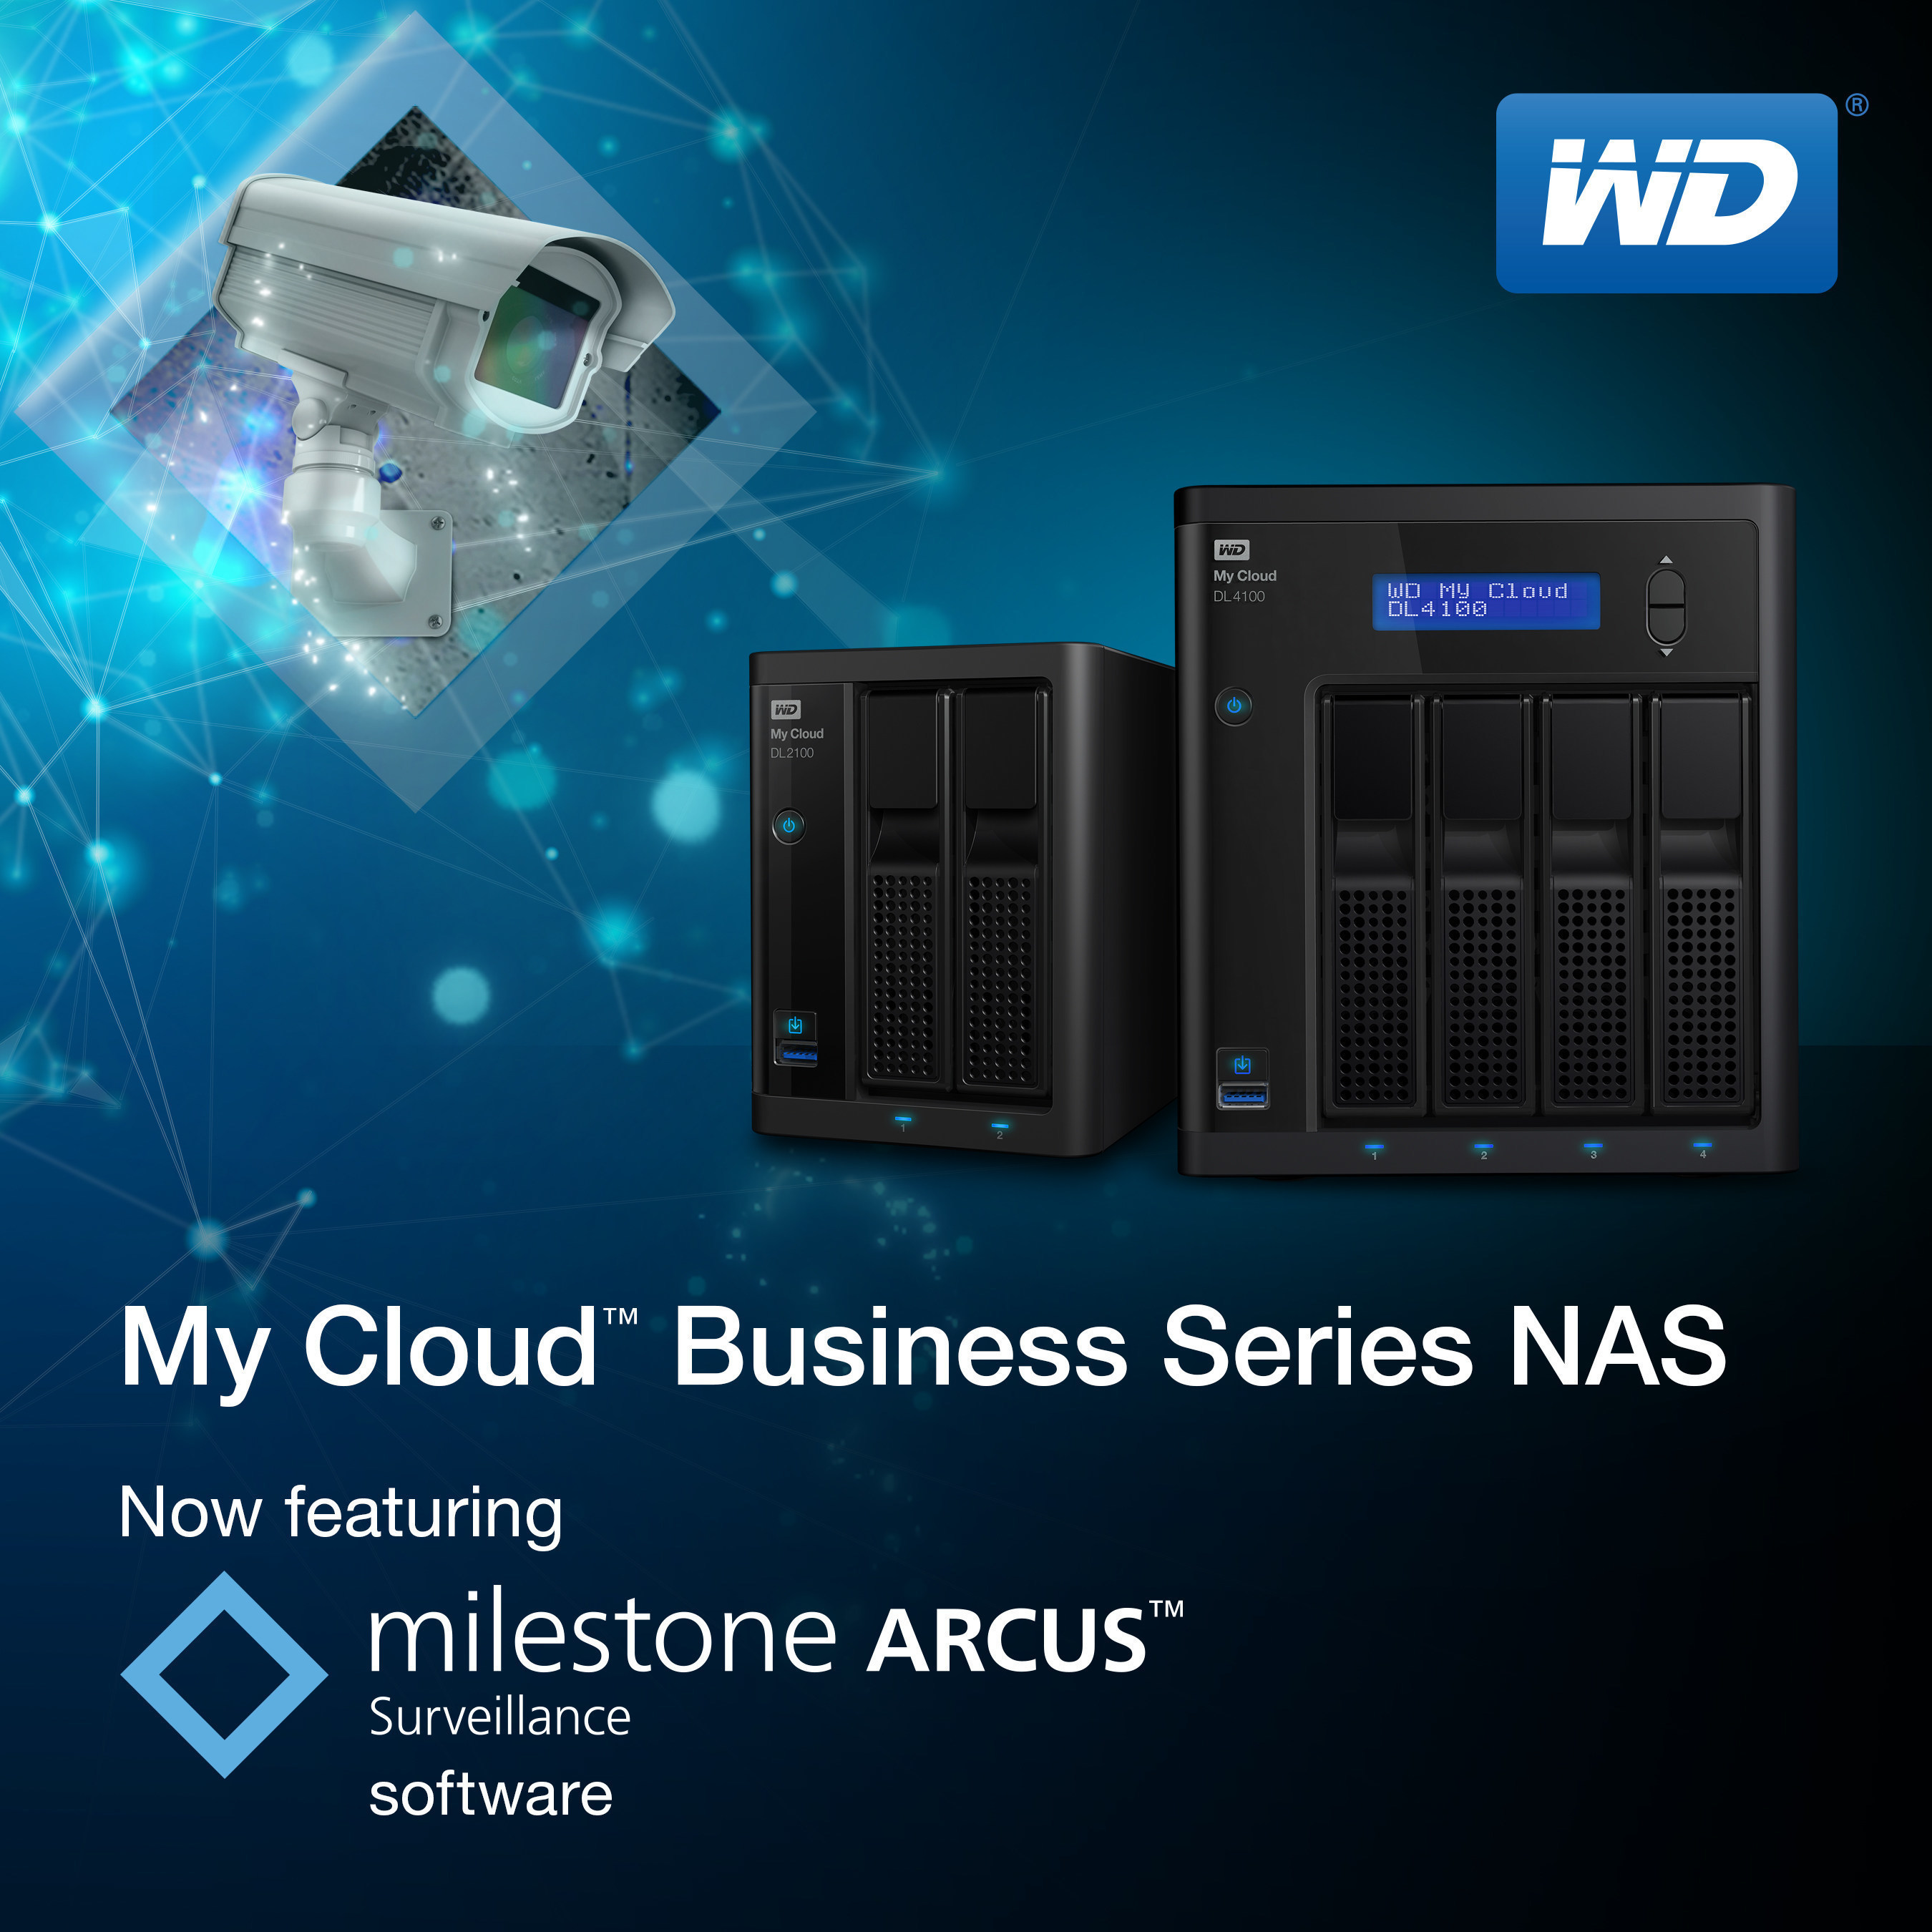 WD And Milestone Partner To Provide Video Surveillance Solutions For Businesses And Consumers